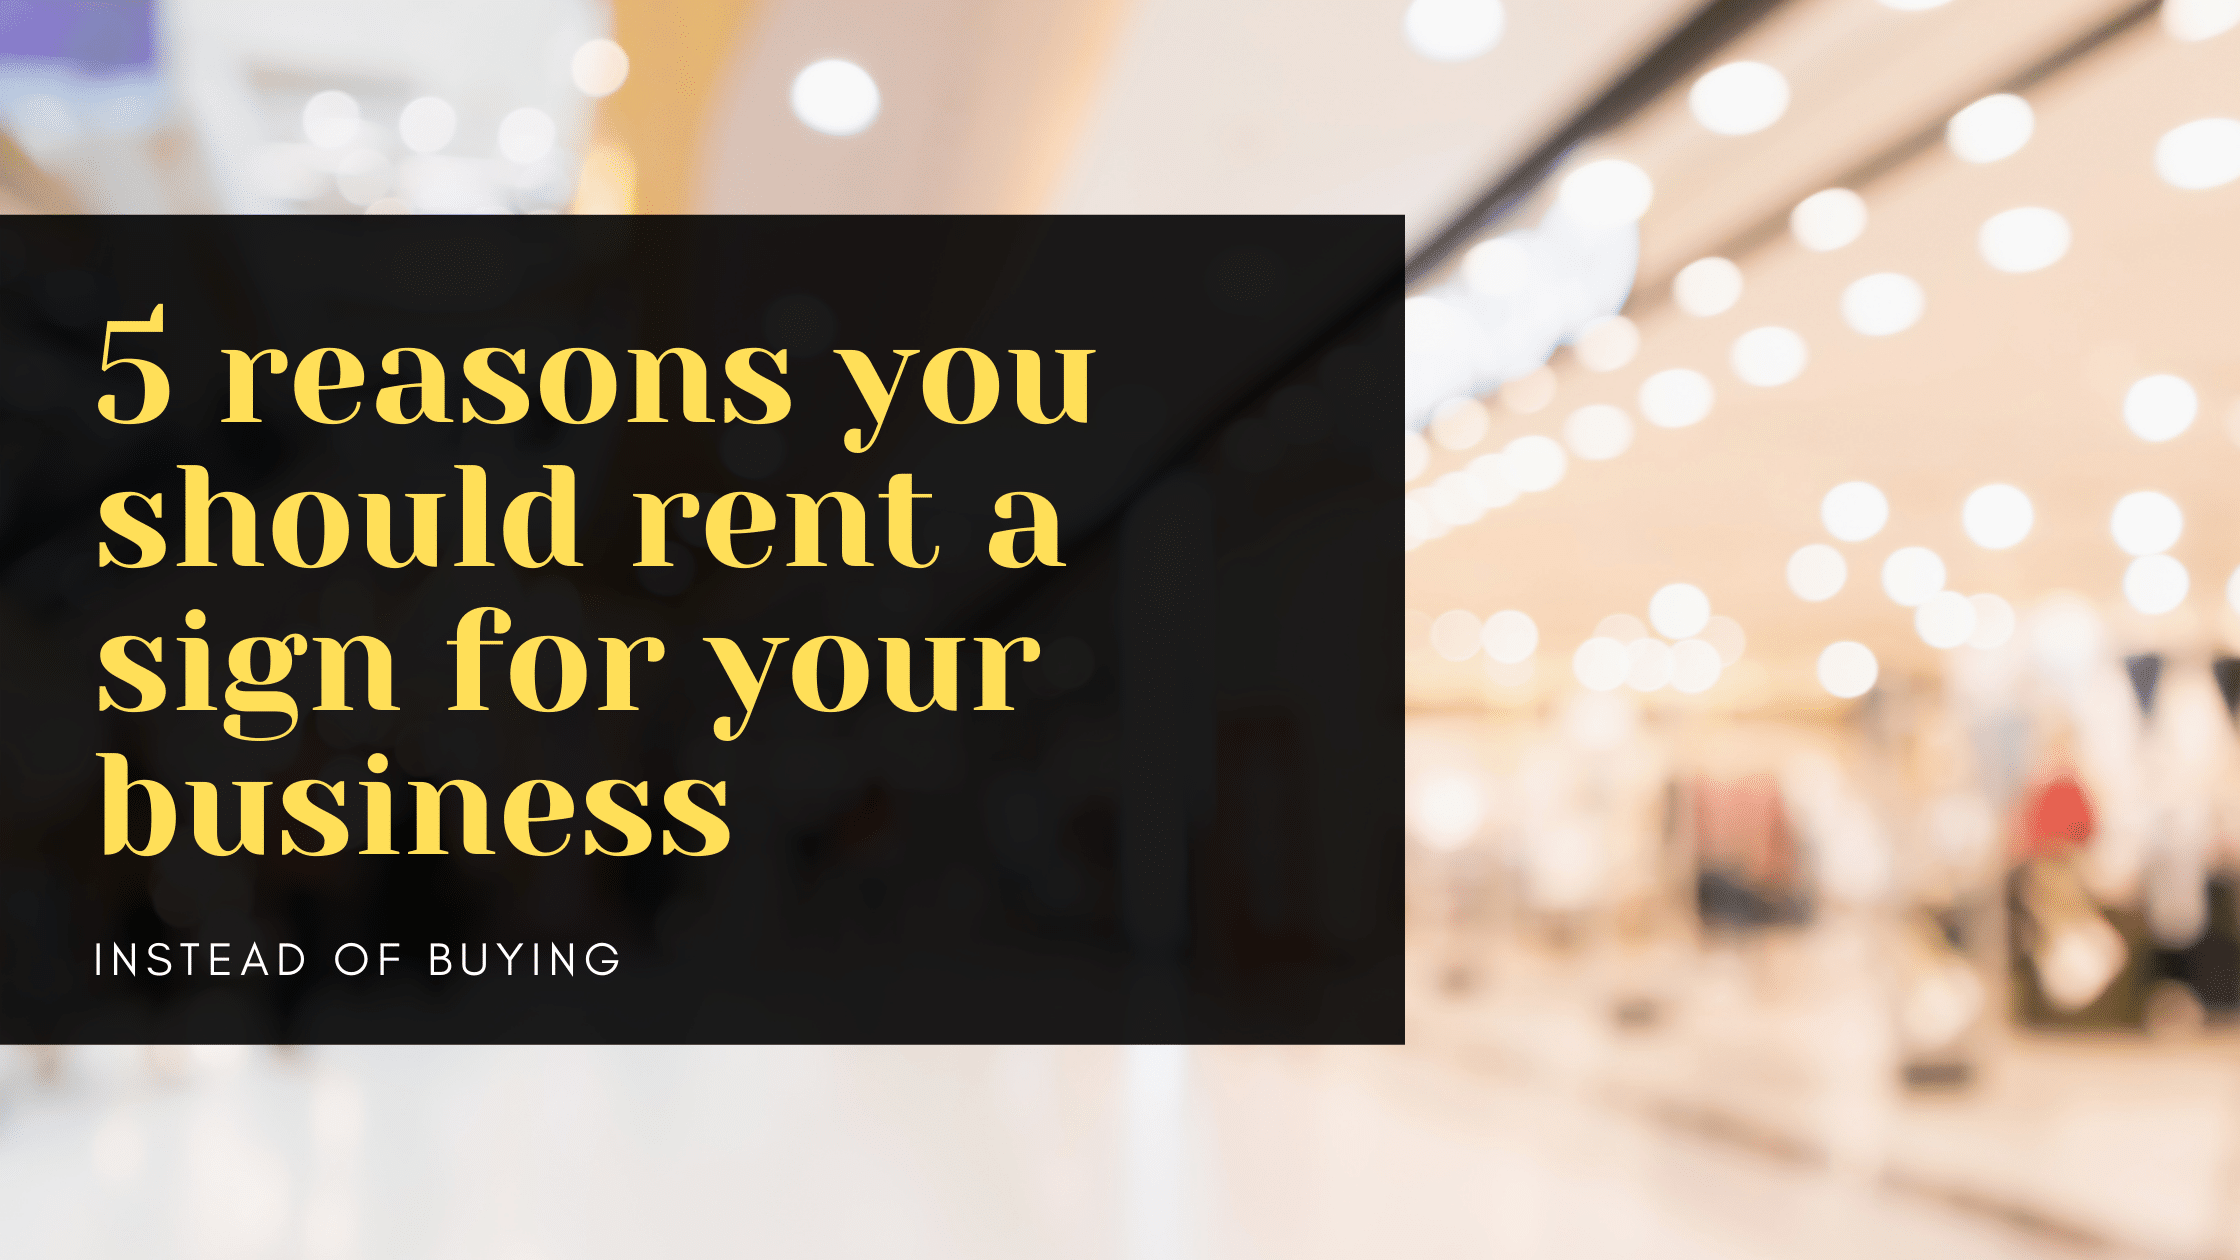 You are currently viewing 5 reasons you should rent a sign for your business instead of buying